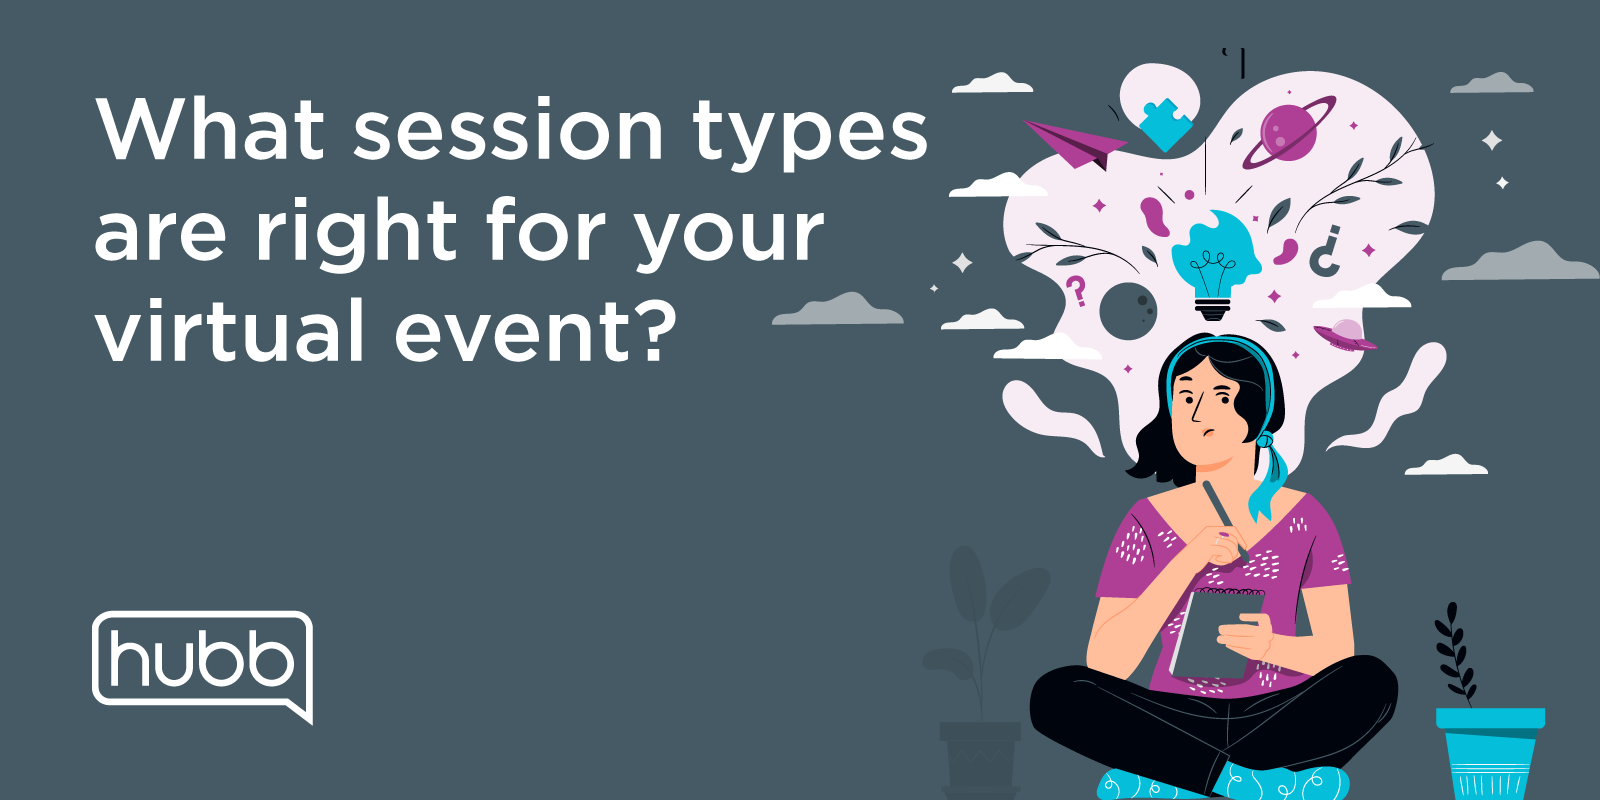 What session types are right for your virtual event? With illustration of woman thinking.